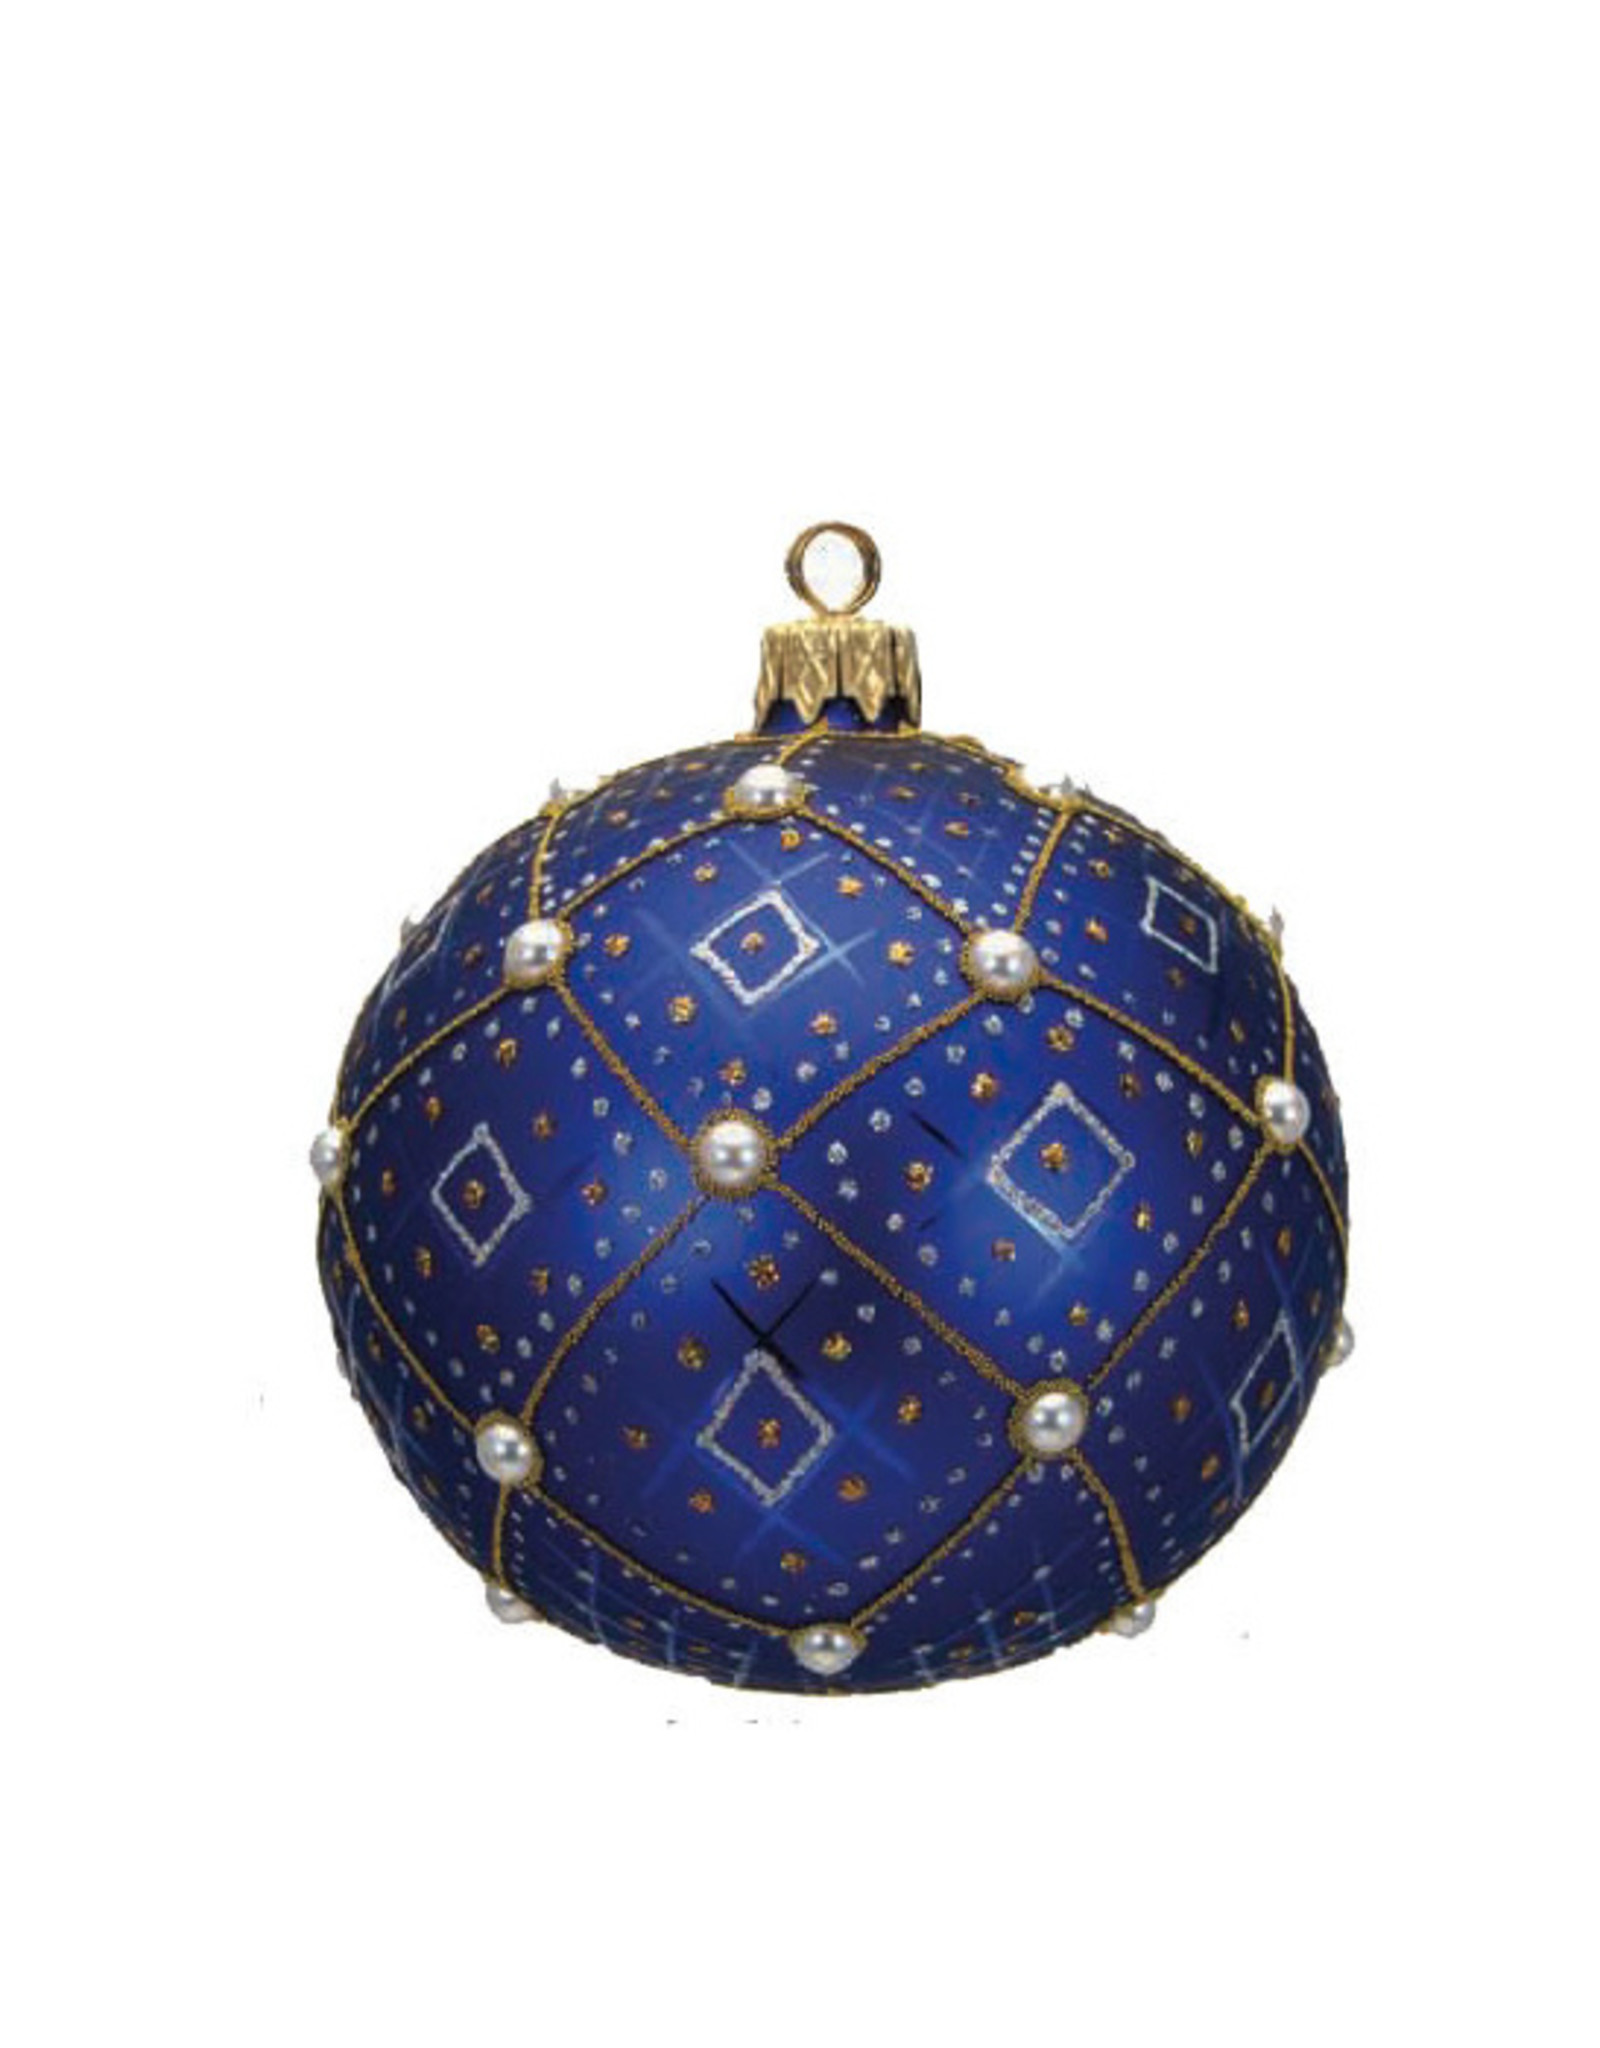 Hand Painted Blue Pearl Ornament